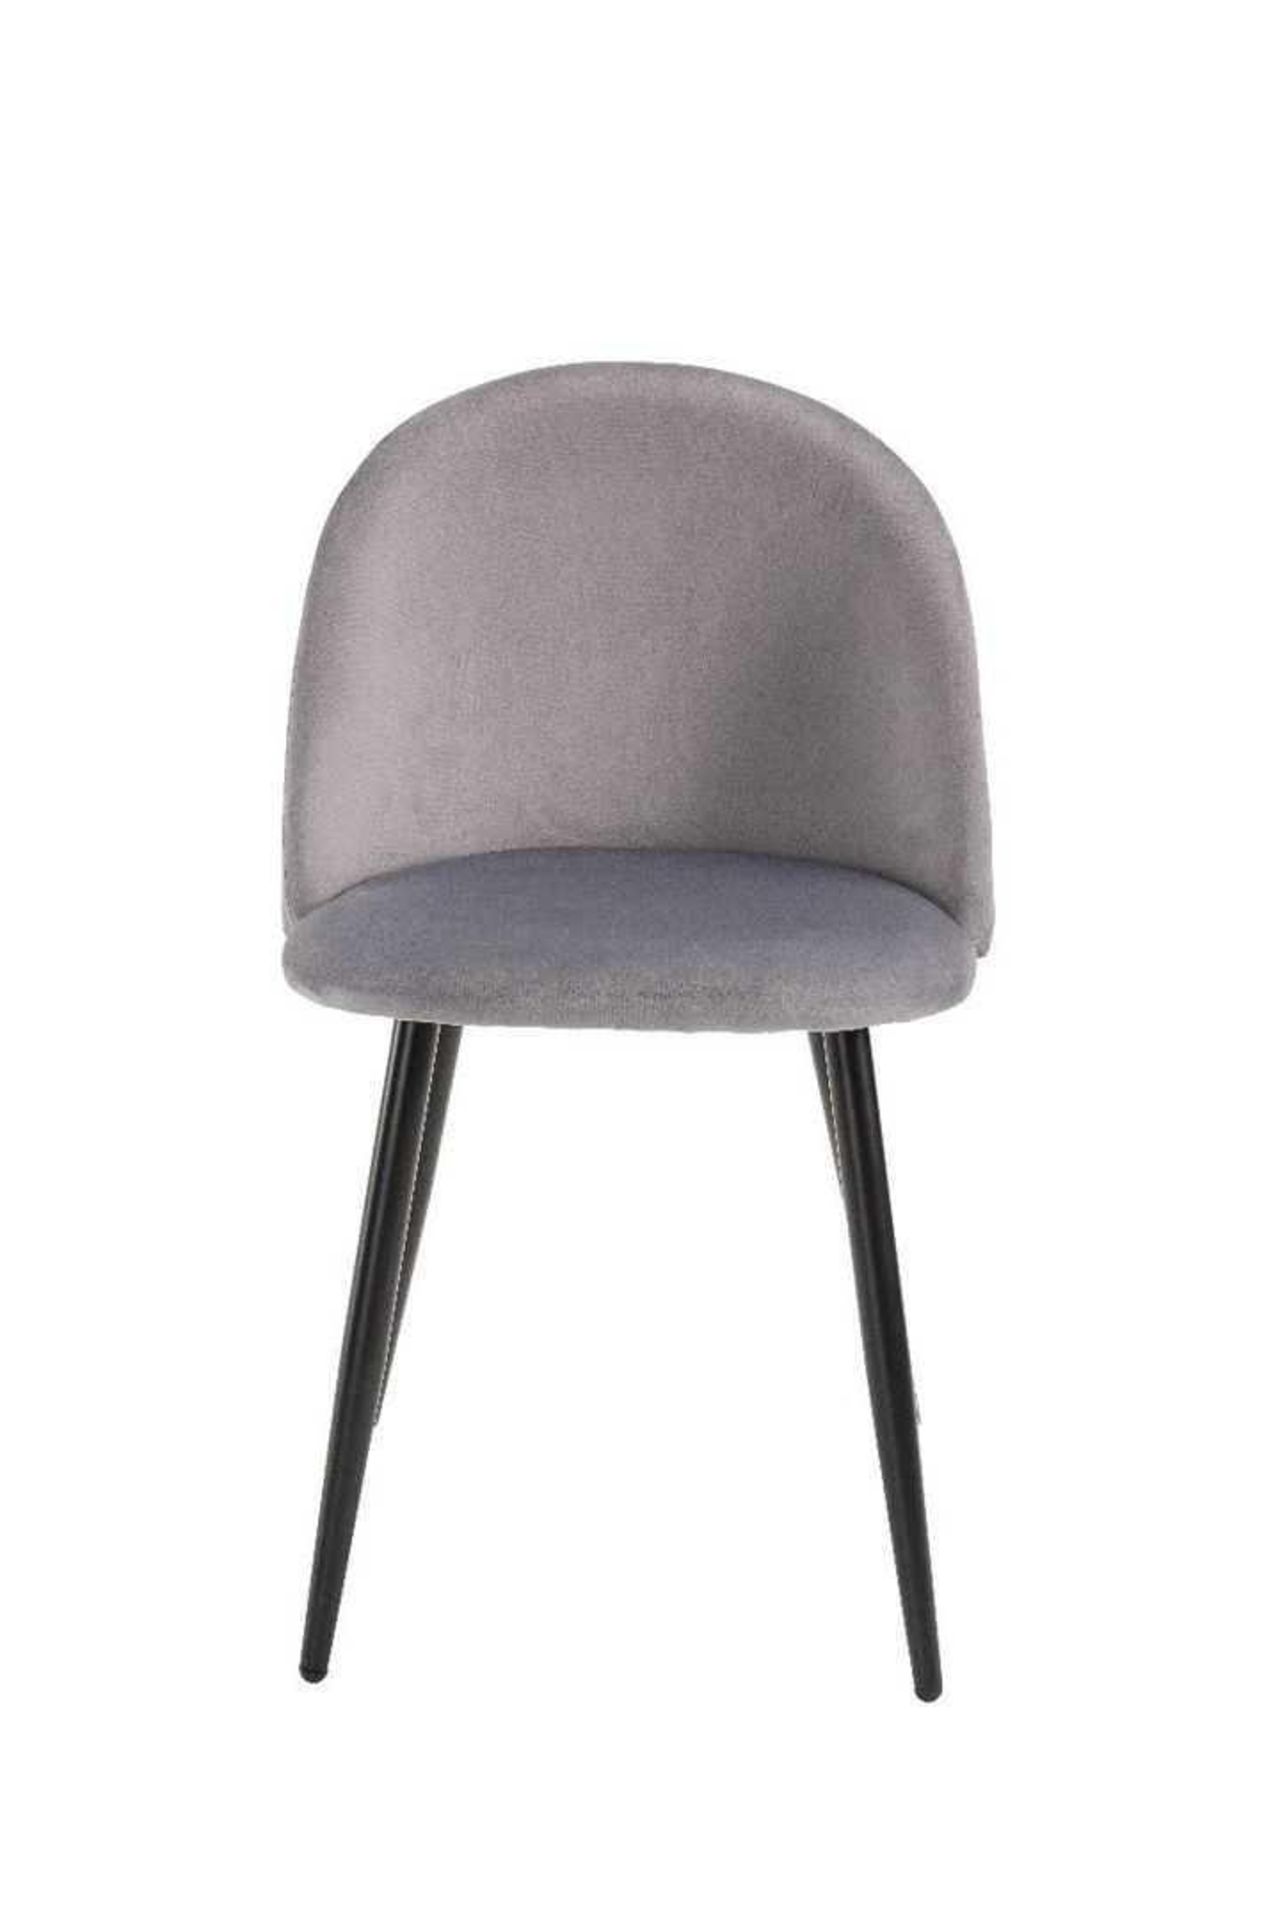 RRP £200 - Boxed New 2 'Lotus' Grey Dining Chairs